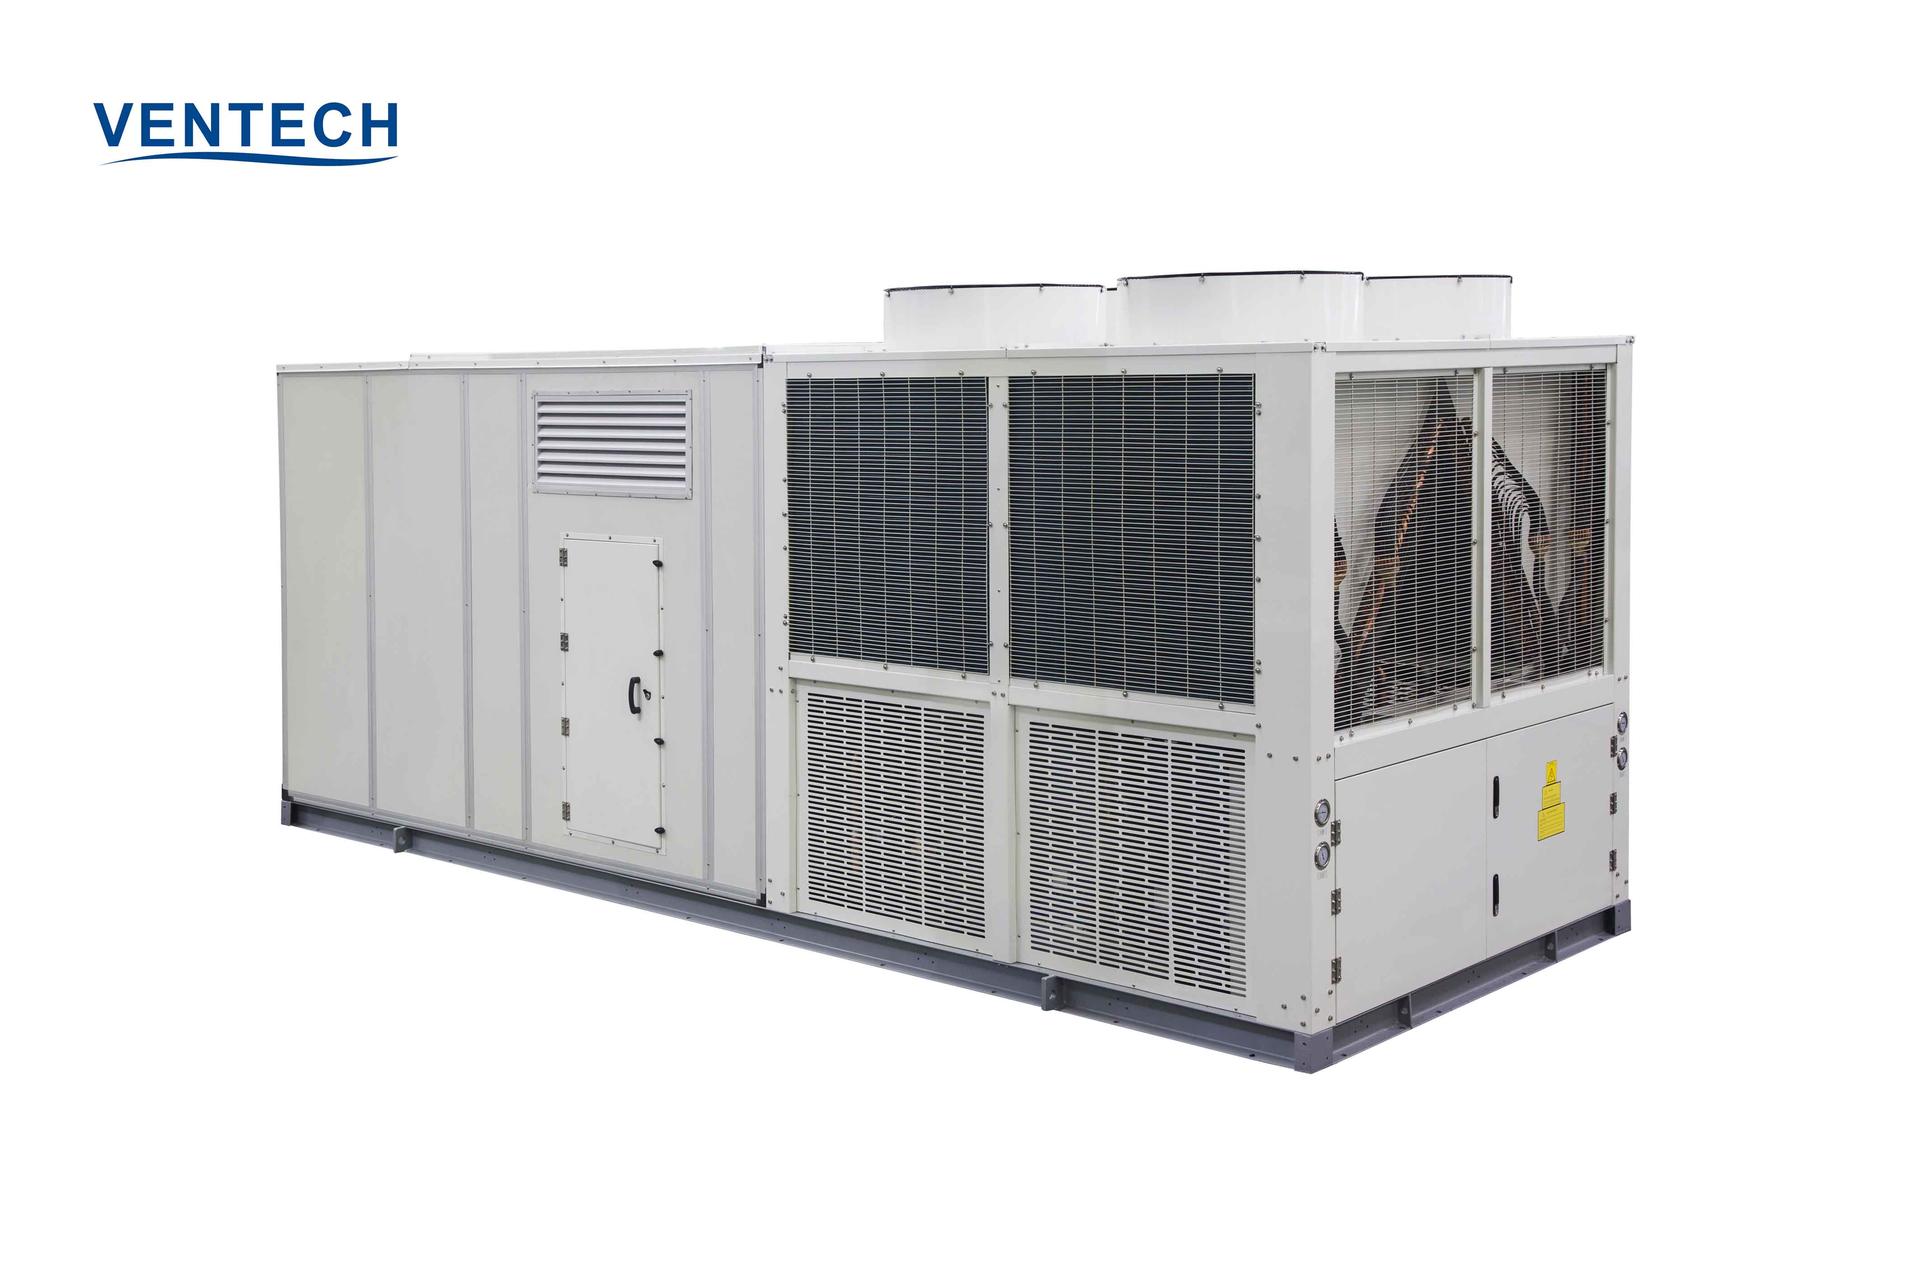 Ventech efficient central air conditioner best supplier for air conditioning